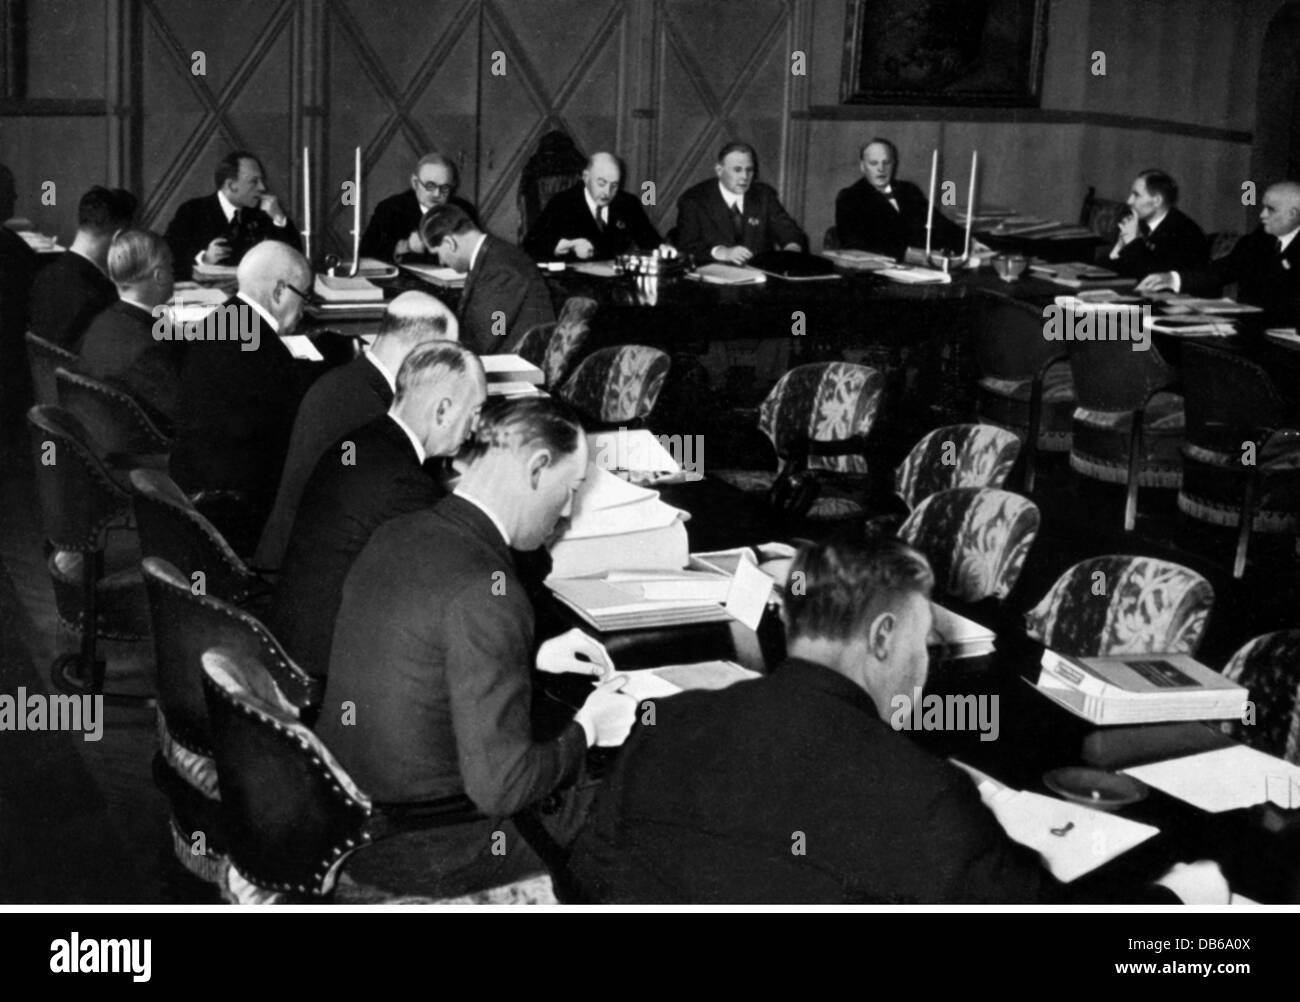 sports, International Olympic Committee (IOC), session, report on the preparations of the Olympic Games in Berlin 1936, Oslo, Norway, 19354, officials, 1930s, 30s, 20th century, historic, historical, people, Additional-Rights-Clearences-Not Available Stock Photo